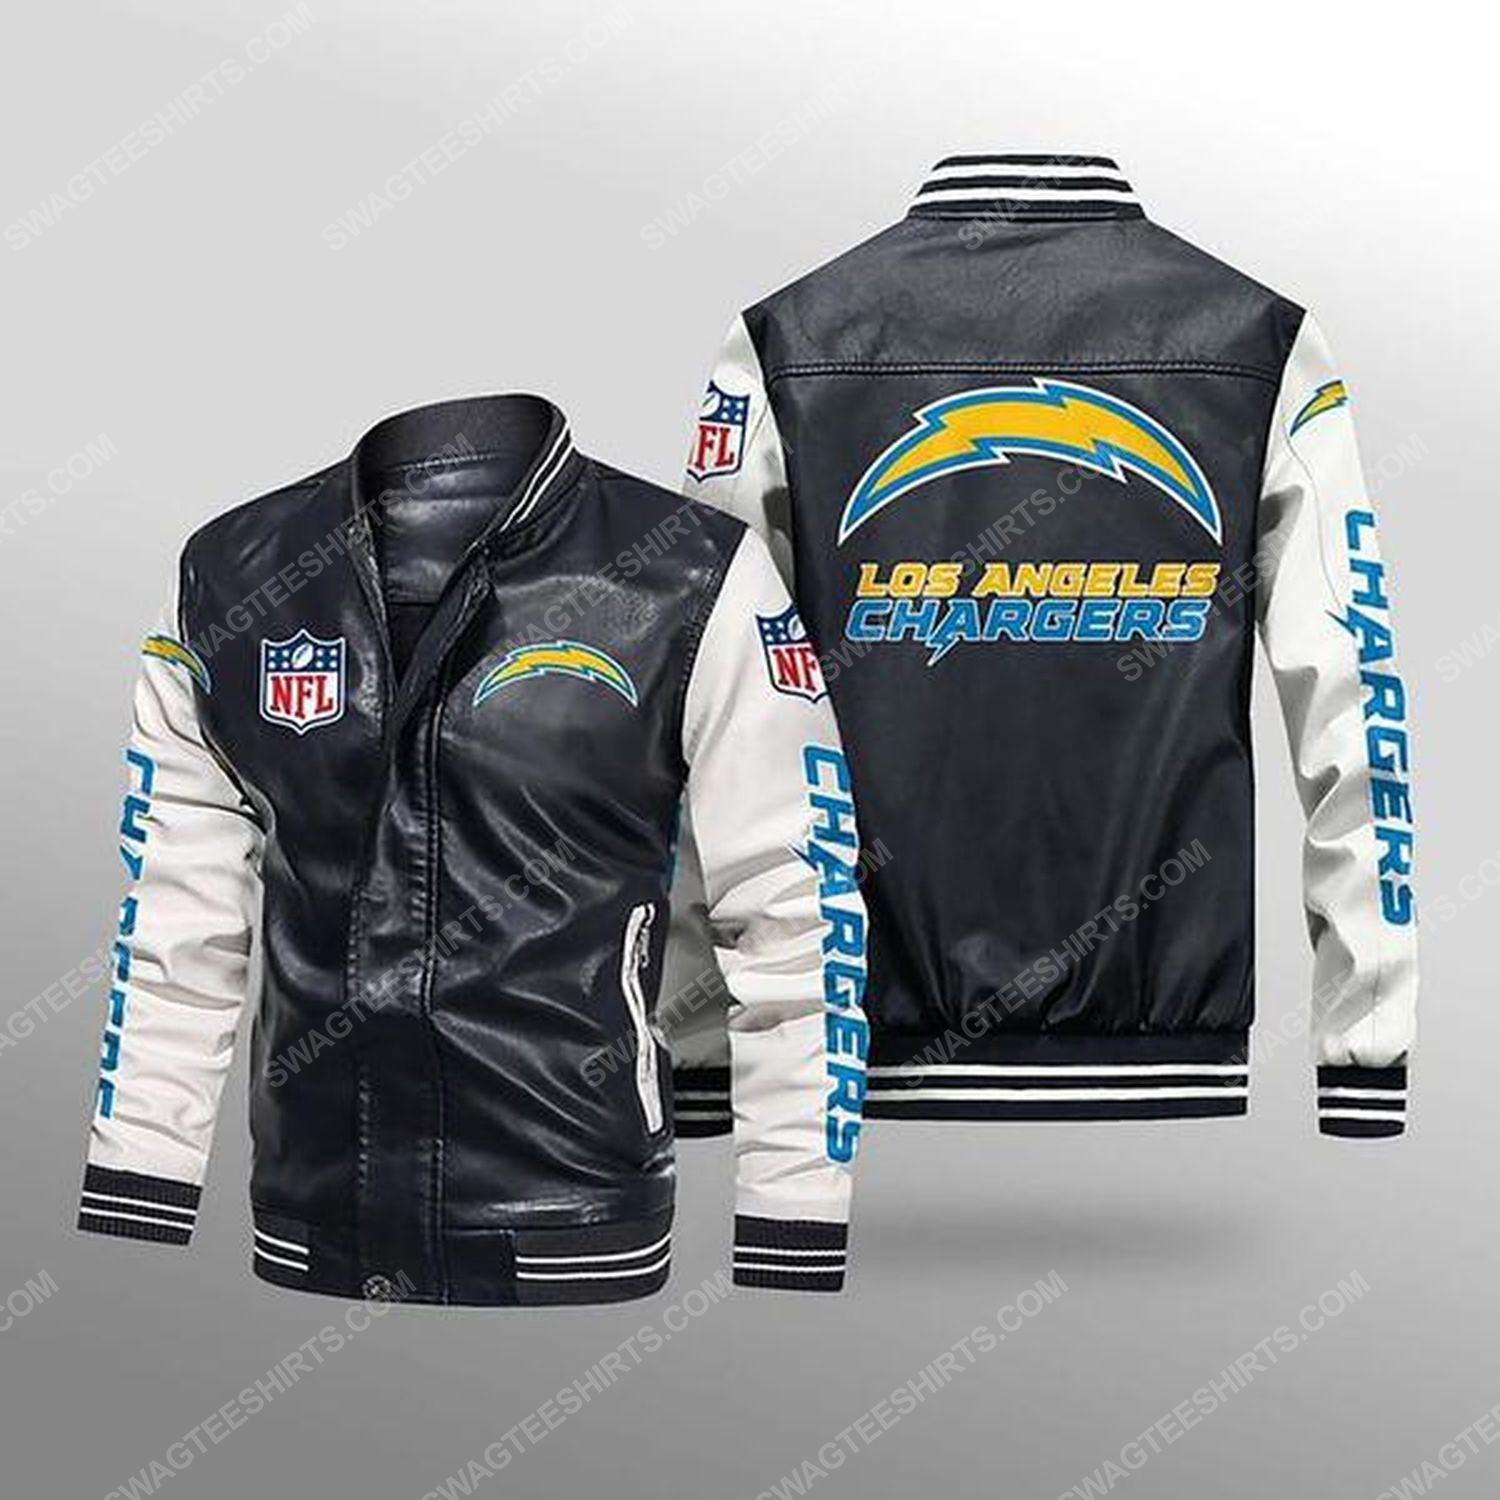 Los angeles chargers all over print leather bomber jacket - white